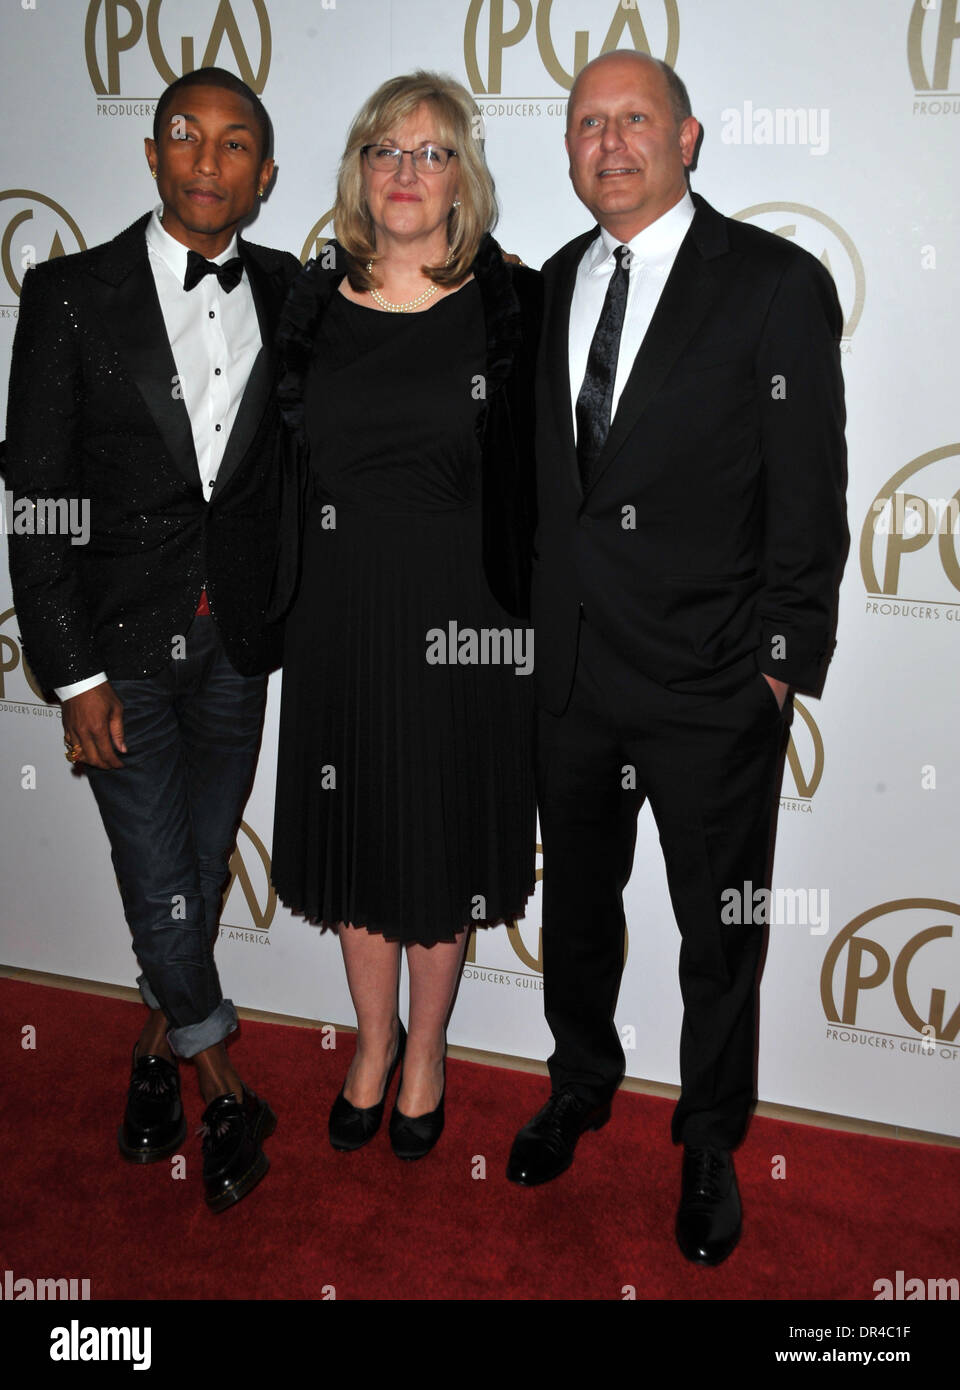 Los Angeles, California, USA. 19th Jan, 2014. Christopher Meledandri, Pharrell Williams, Janet Healy attending the 25th Annual Producers Guild Awards held at the Beverly Hilton Hotel in Beverly Hills, California on January 19, 2014. 2014. Credit:  D. Long/Globe Photos/ZUMAPRESS.com/Alamy Live News Stock Photo